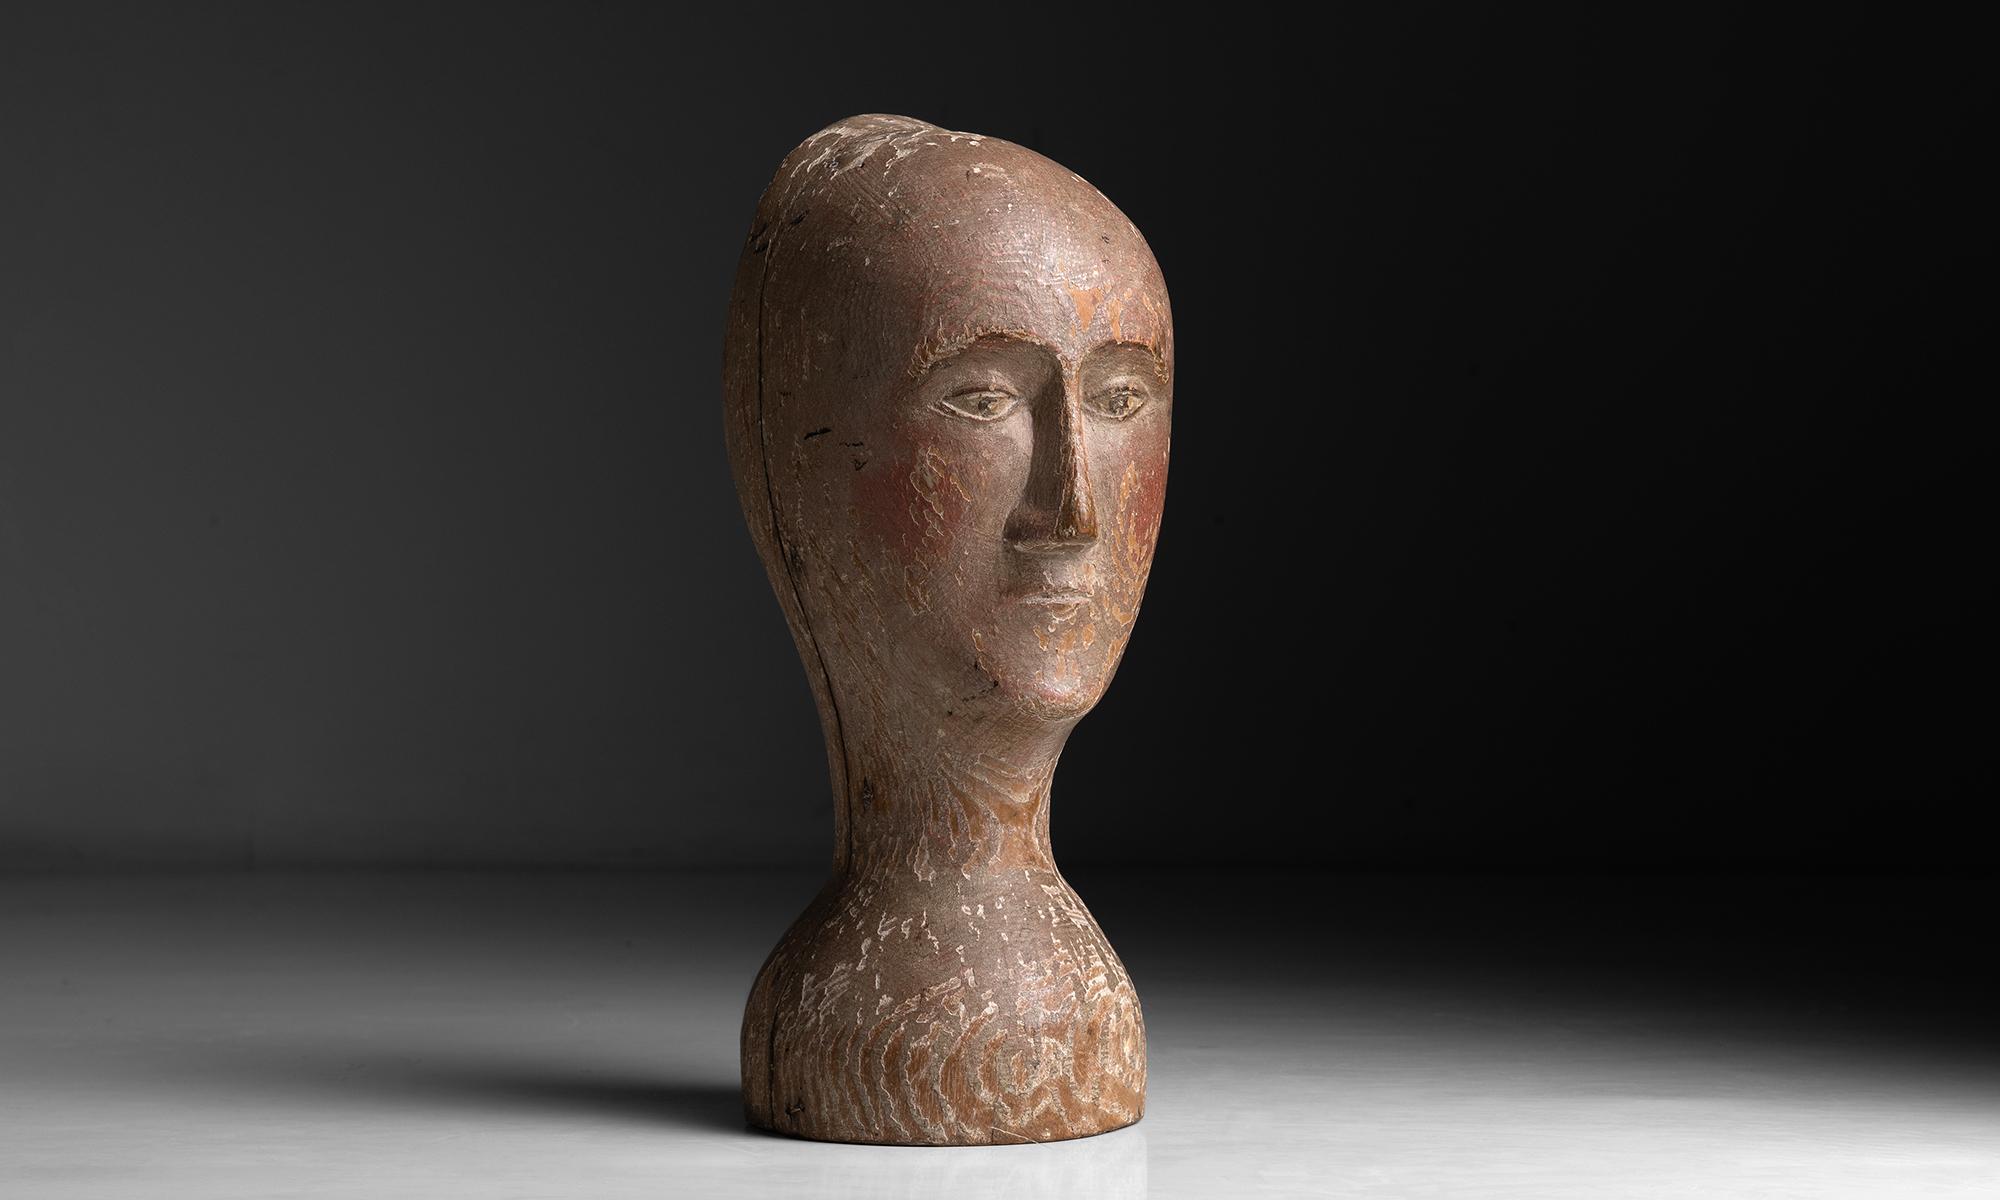 Marotte Porte Coiffé Head

France circa 1800

Finely carved pine Milliners head for holding wigs.

Measures: 6”w x 8”d x 14.25”h.